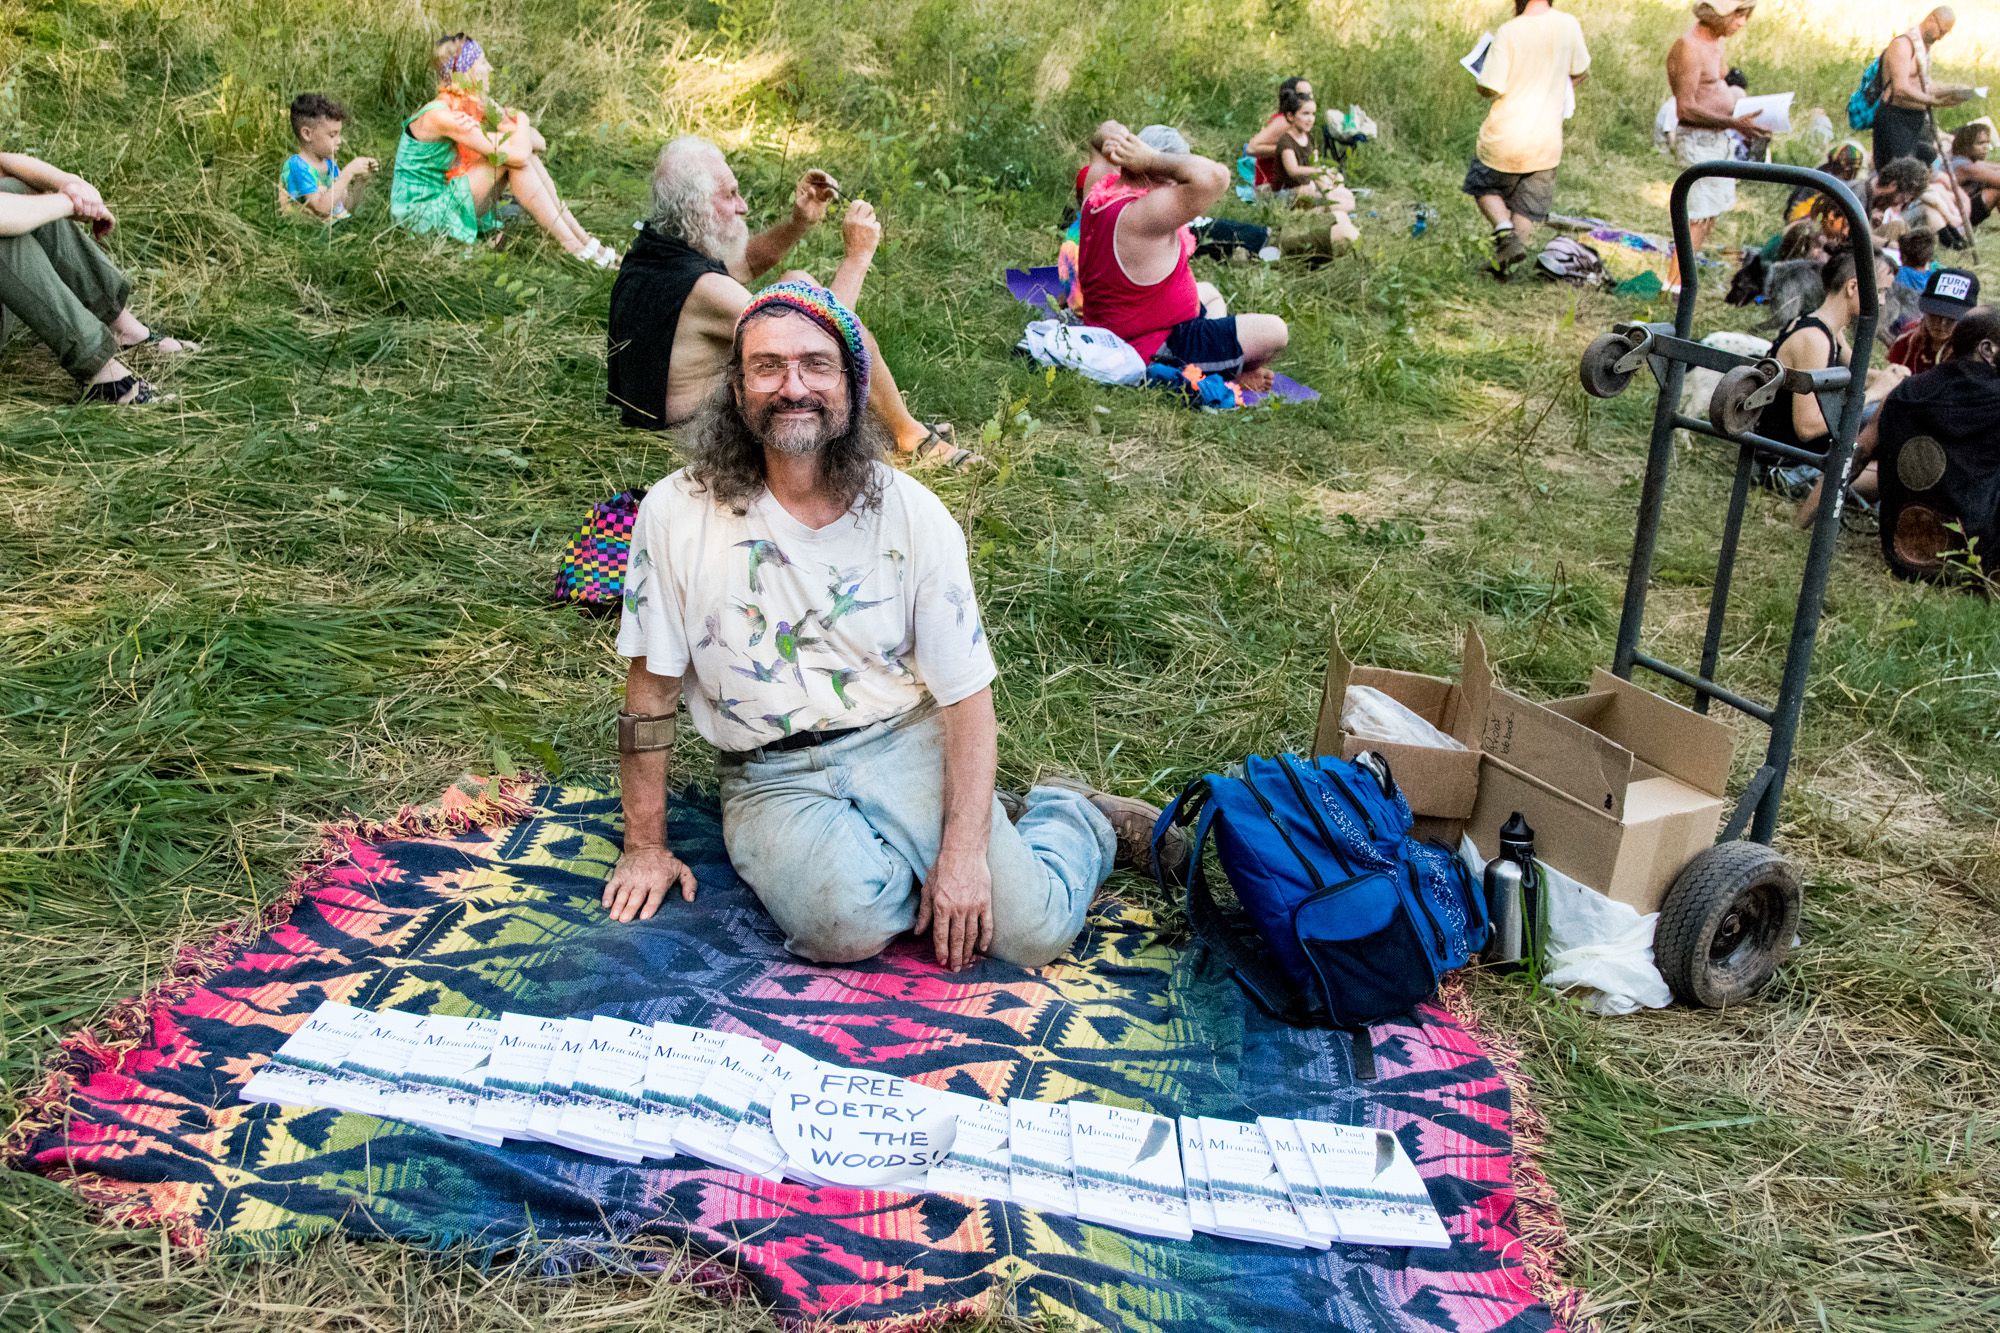 Rainbow Family of Living Light gathering comes to Georgia